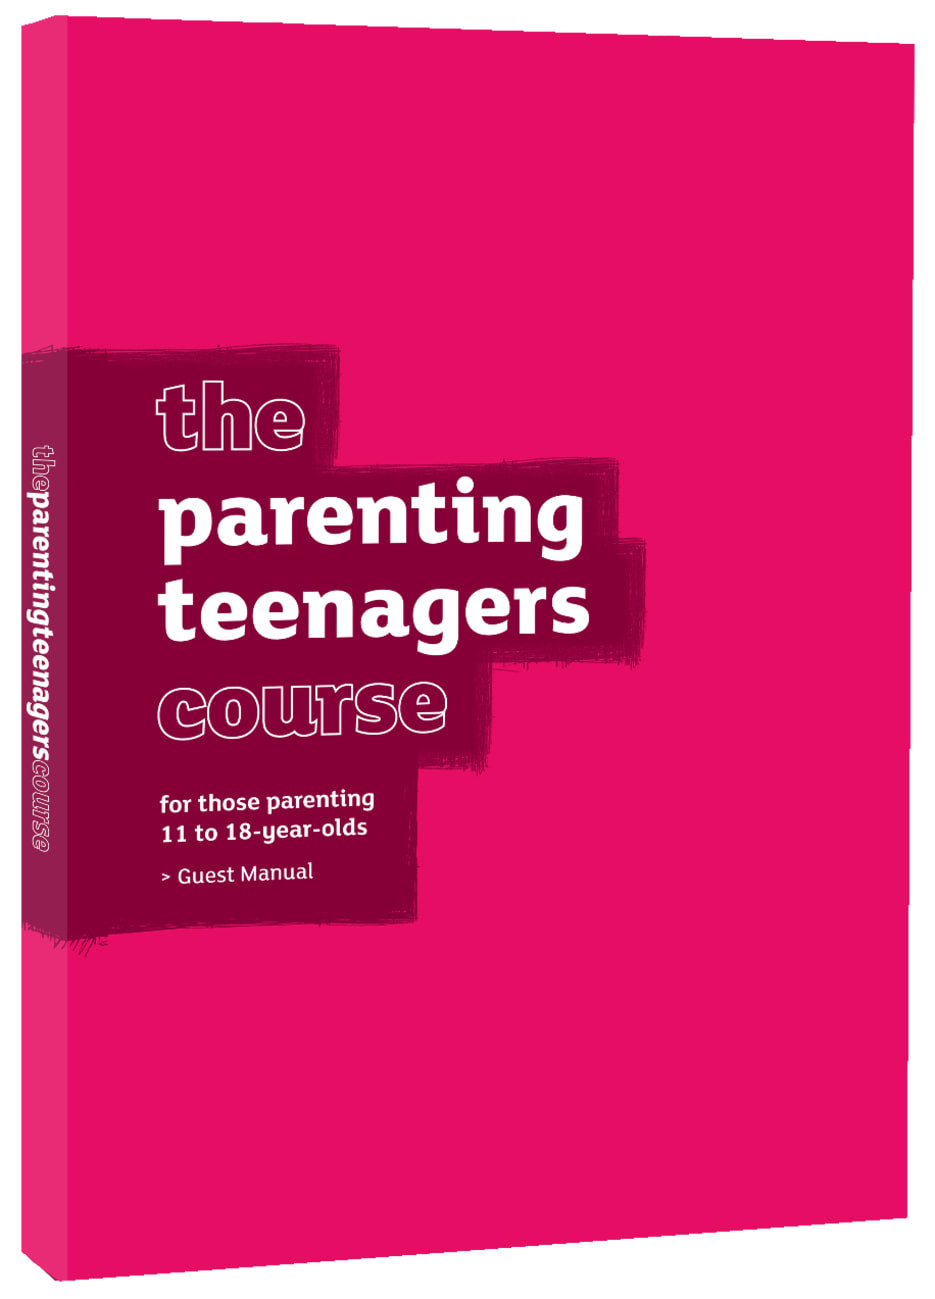 PARENTING TEENAGERS COURSE  THE (GUEST MANUAL)